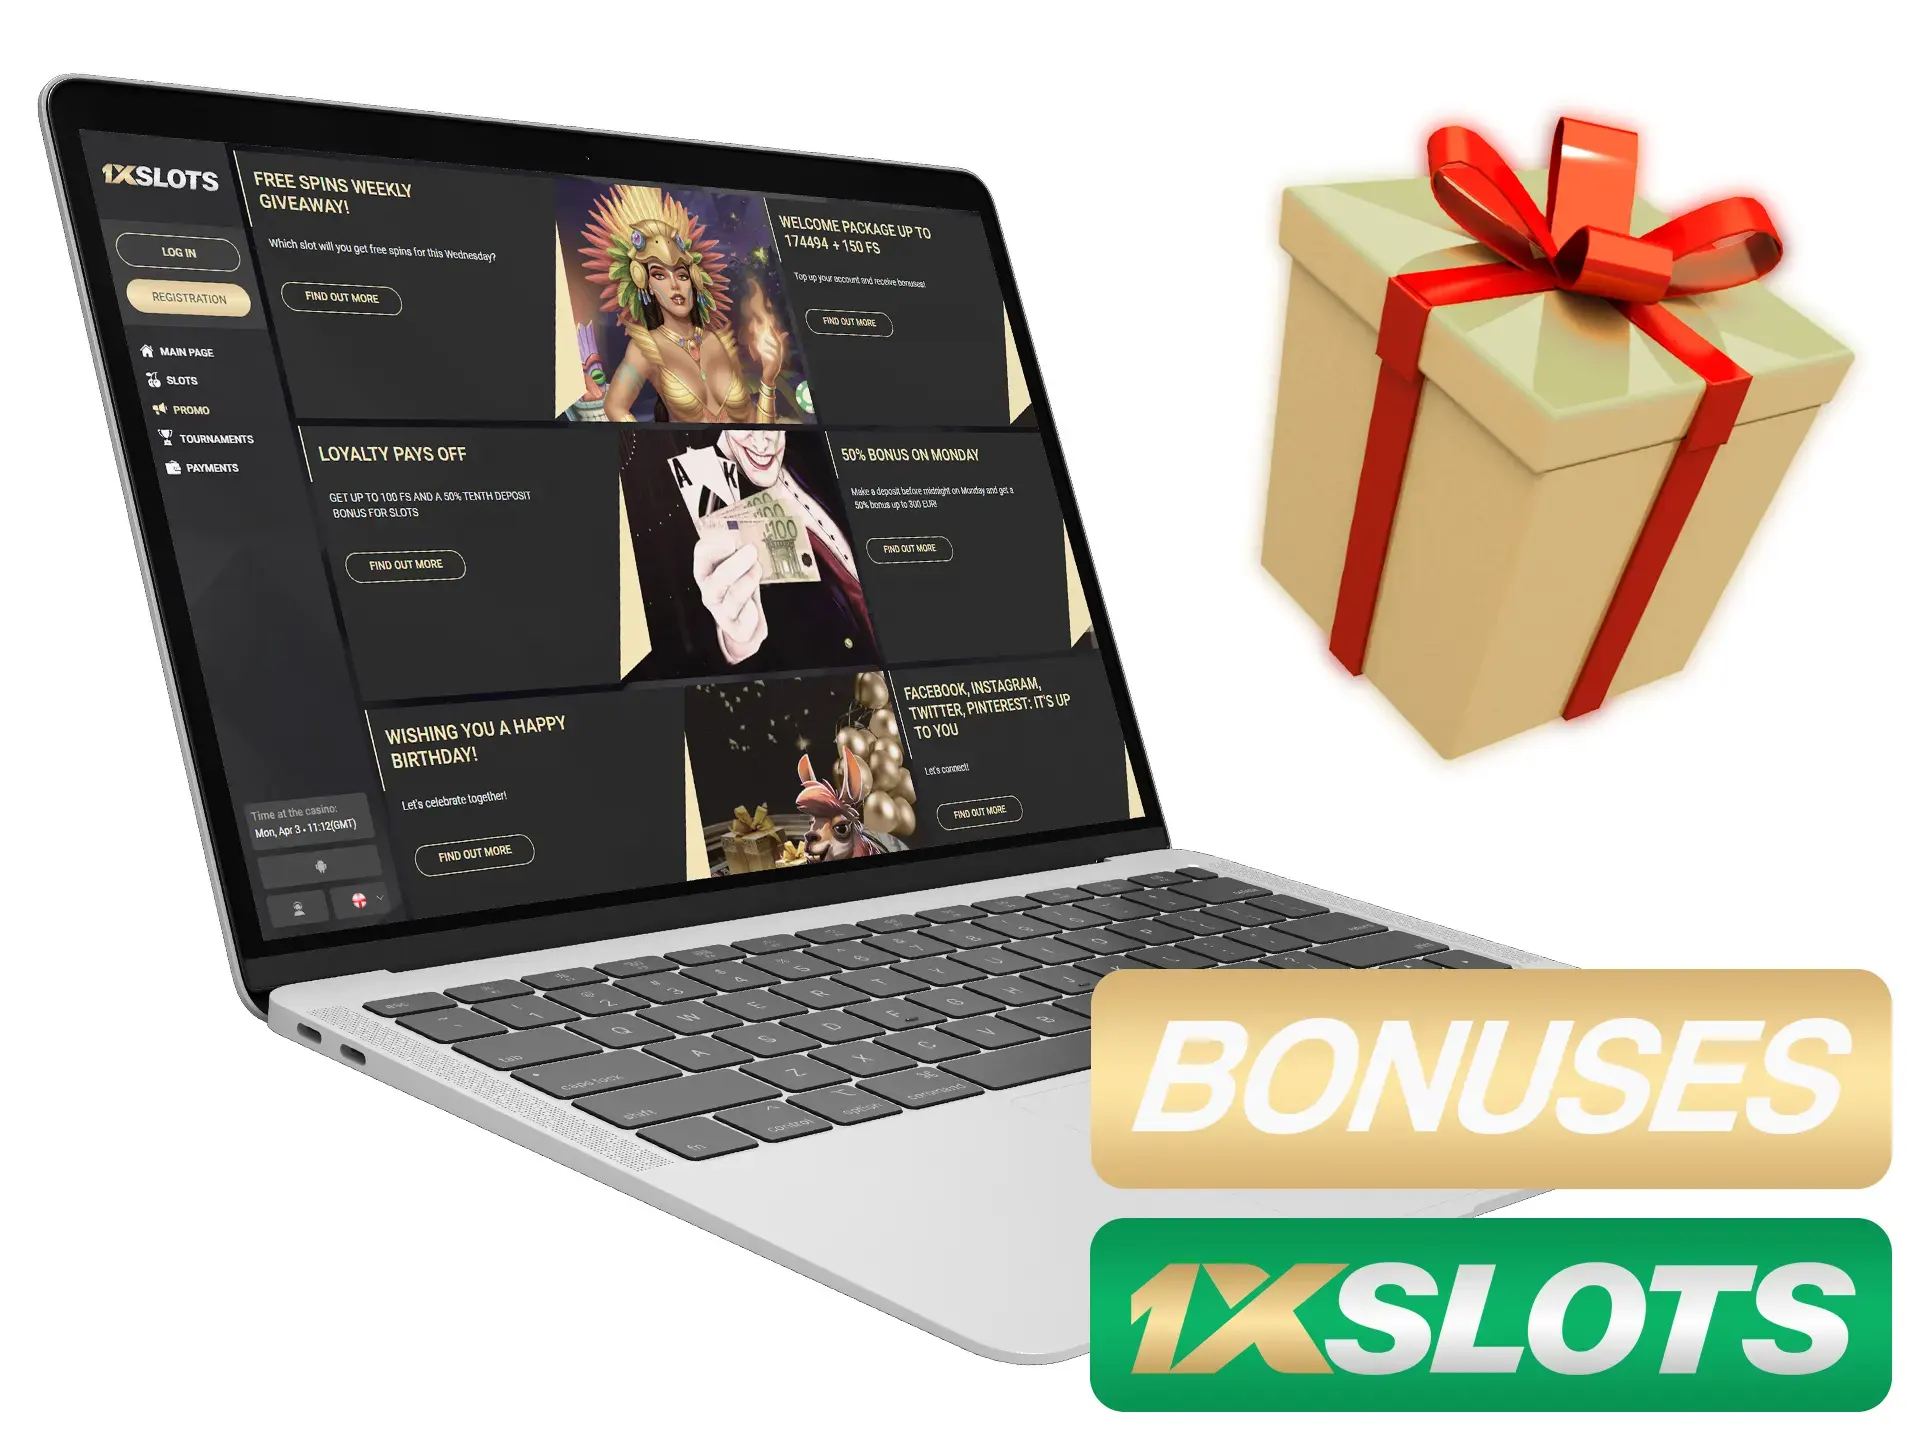 Claim all of the available 1xSlots bonuses.